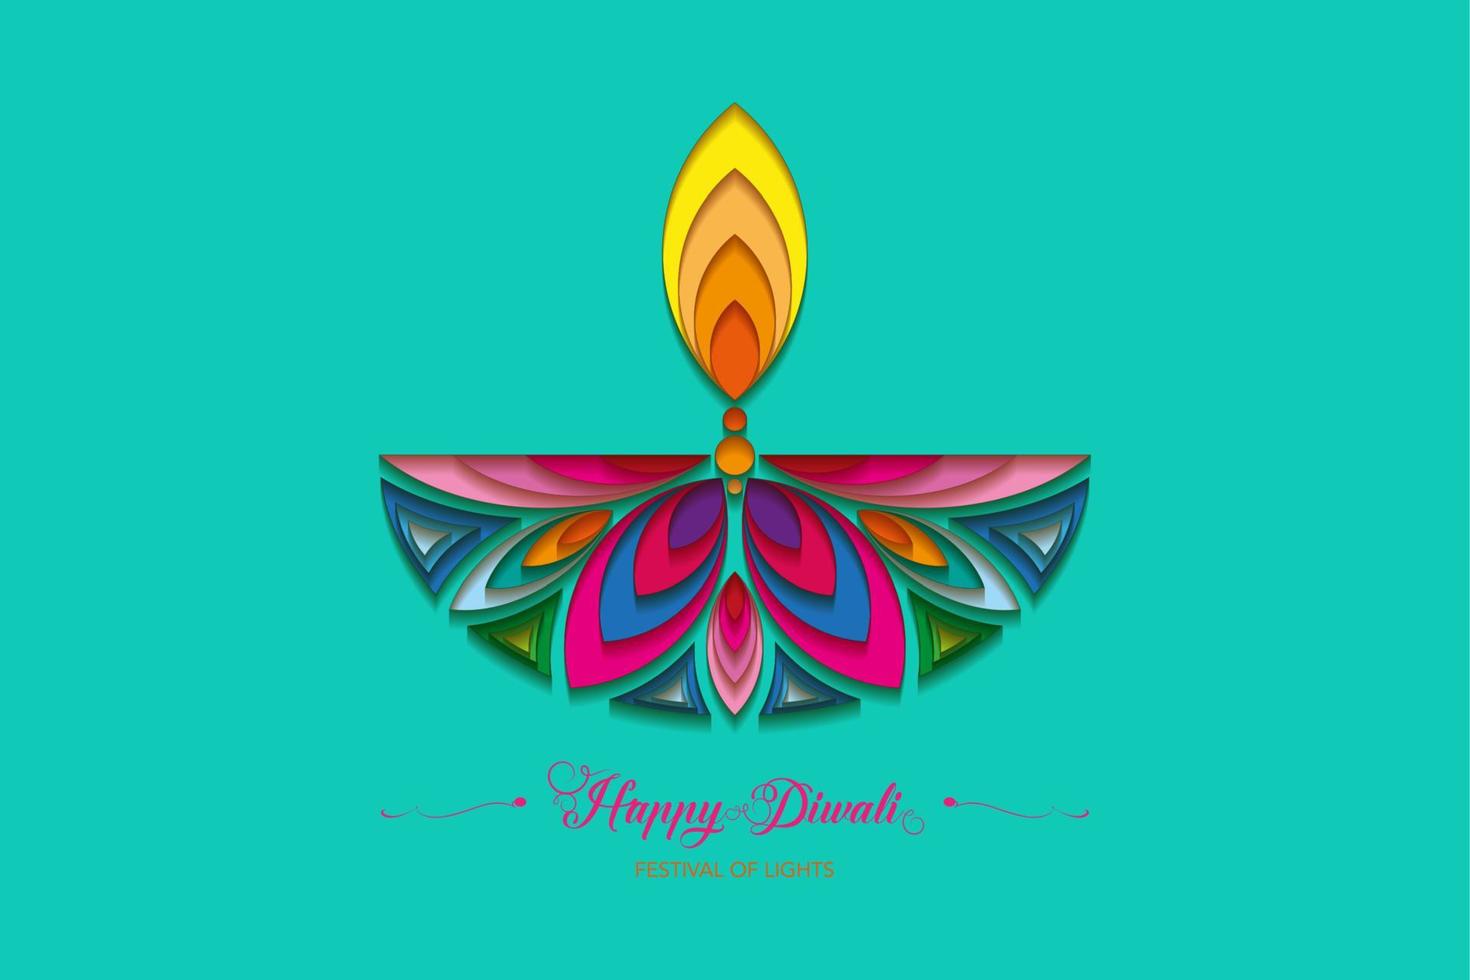 Happy Diwali Festival of Lights India Celebration colorful logo template. Graphic banner design of Indian flower Diya Oil Lamp, Modern Design in vibrant colors. Vector isolated on green background